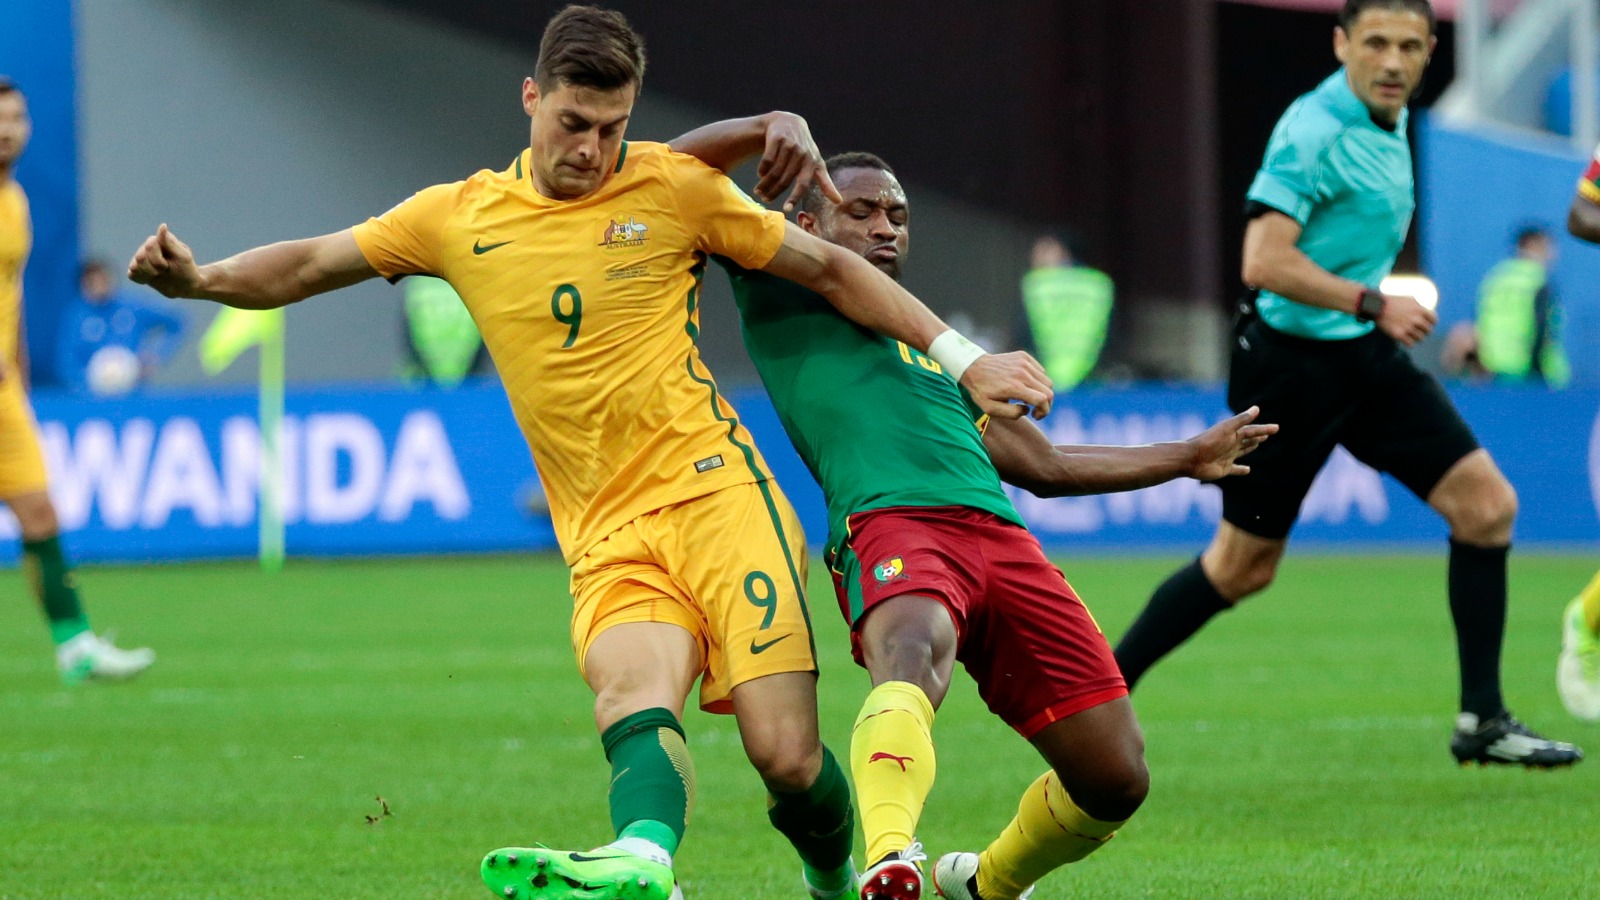 4 takeaways from Cameroon and Australia's 1-1 draw at the Confederations Cup